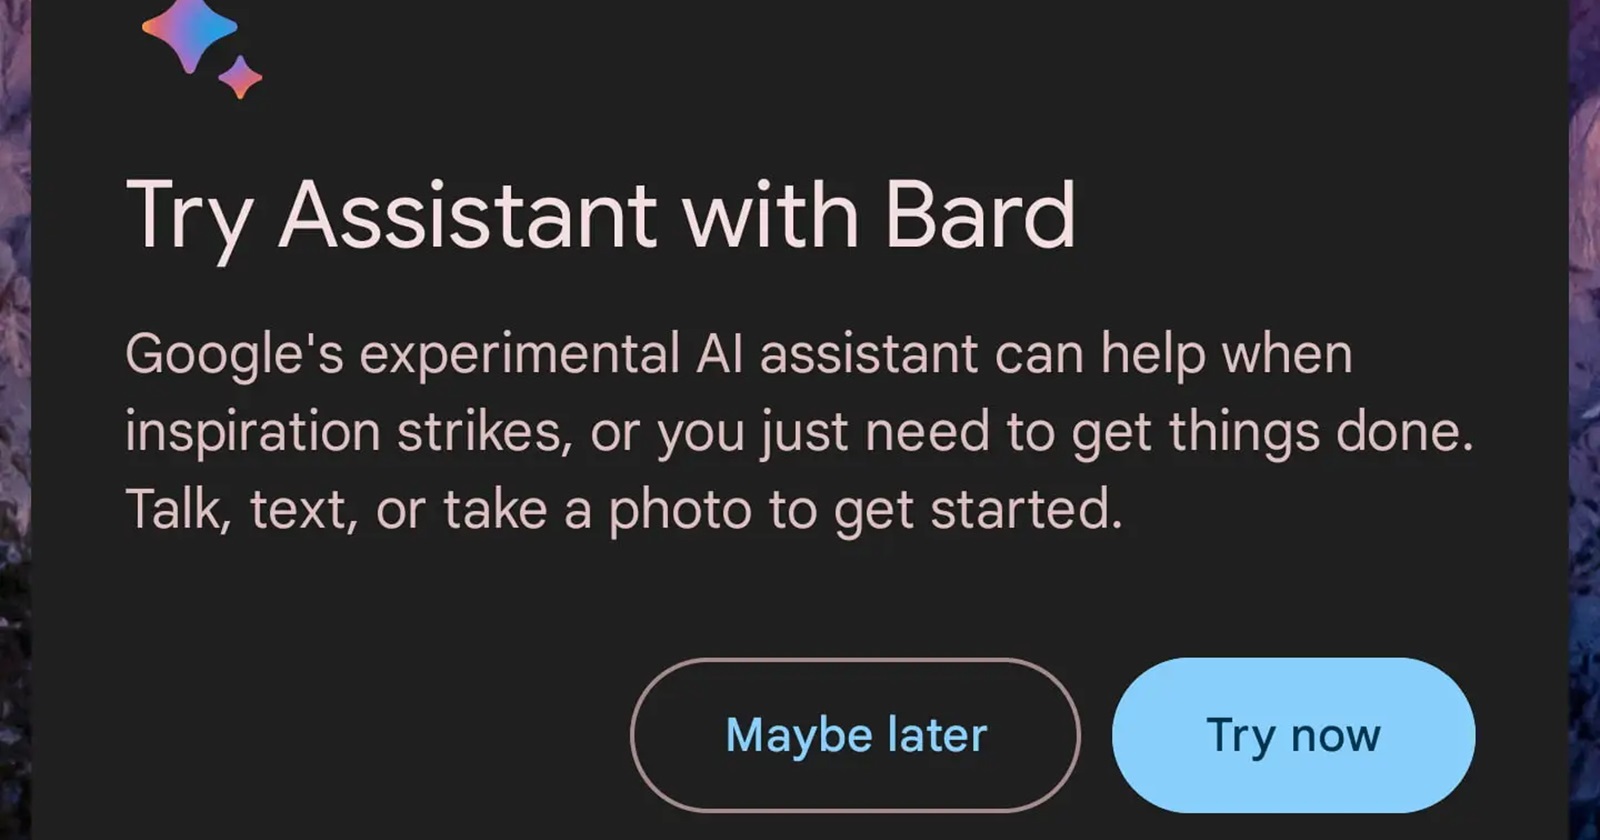 Here's a glimpse of how Bard-powered Google Assistant will look on your Pixel phone